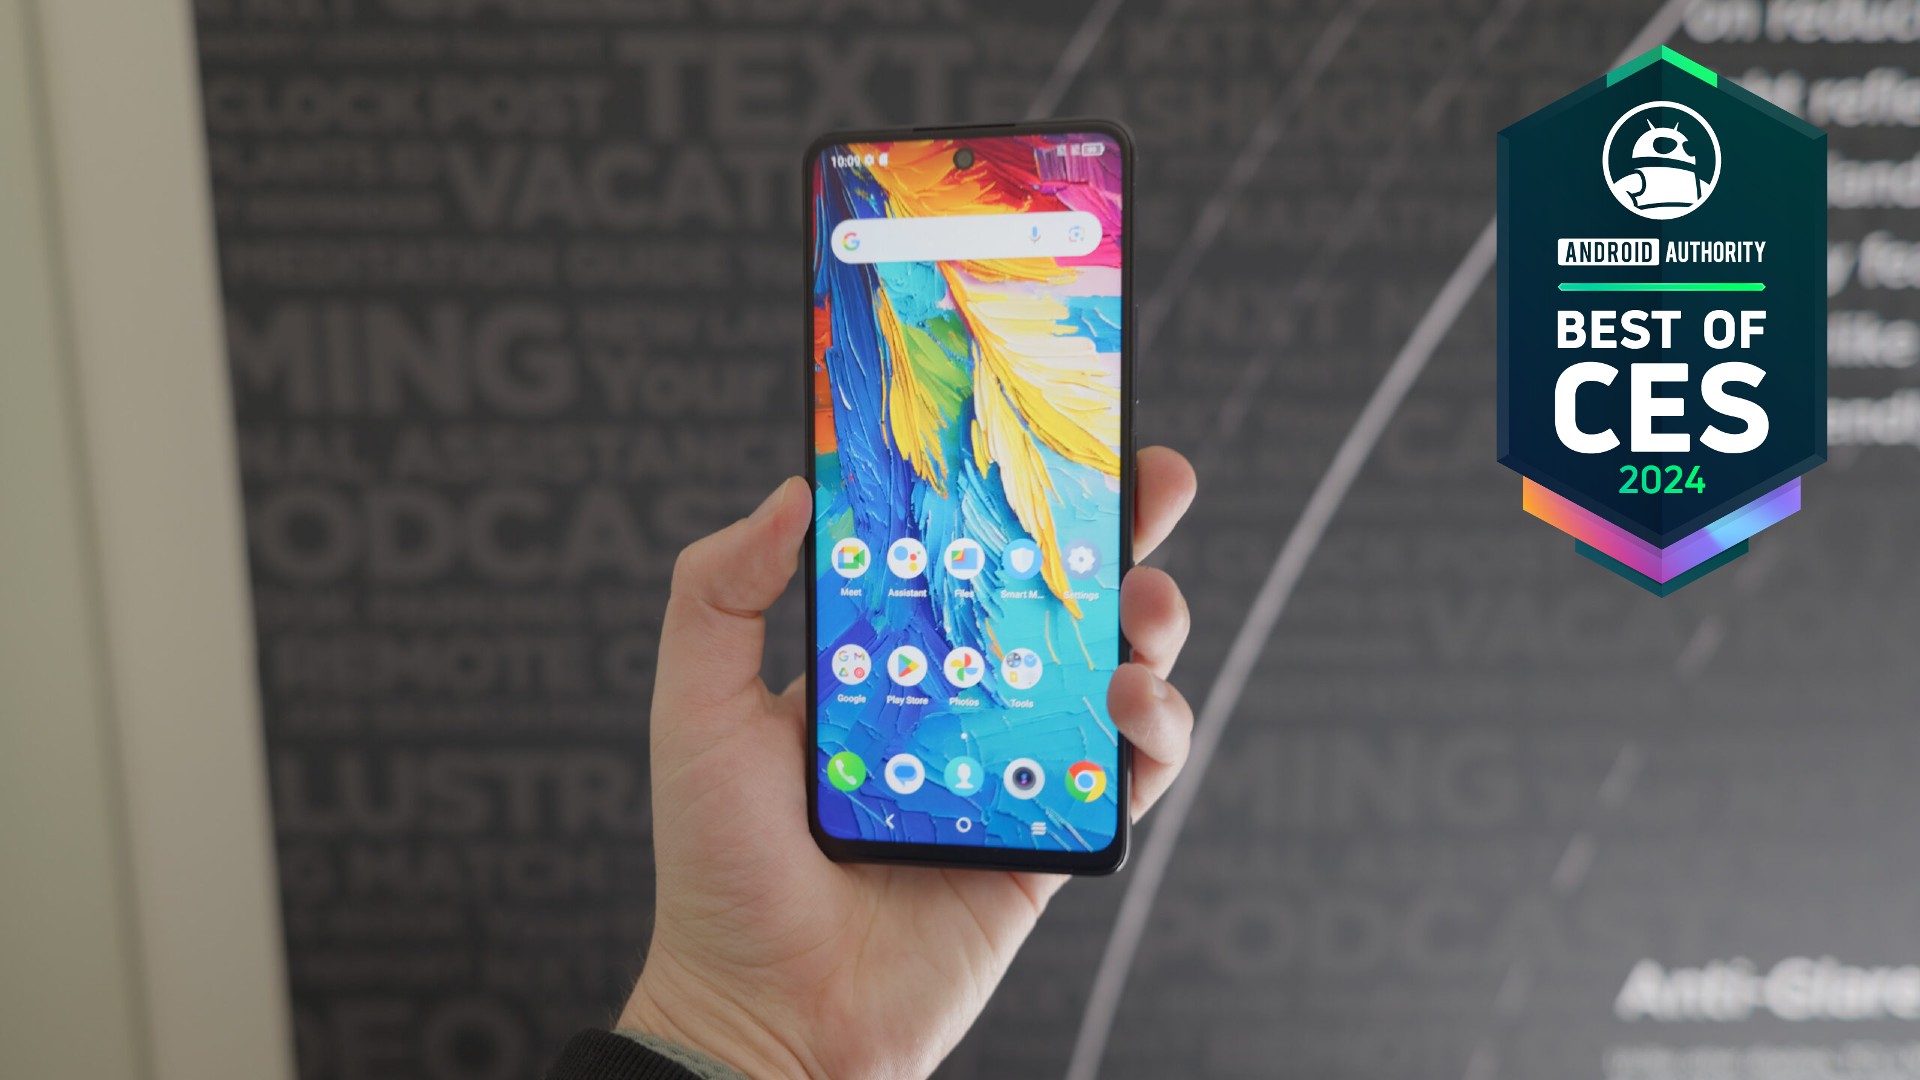 TCL Nxtpaper best of ces 2024